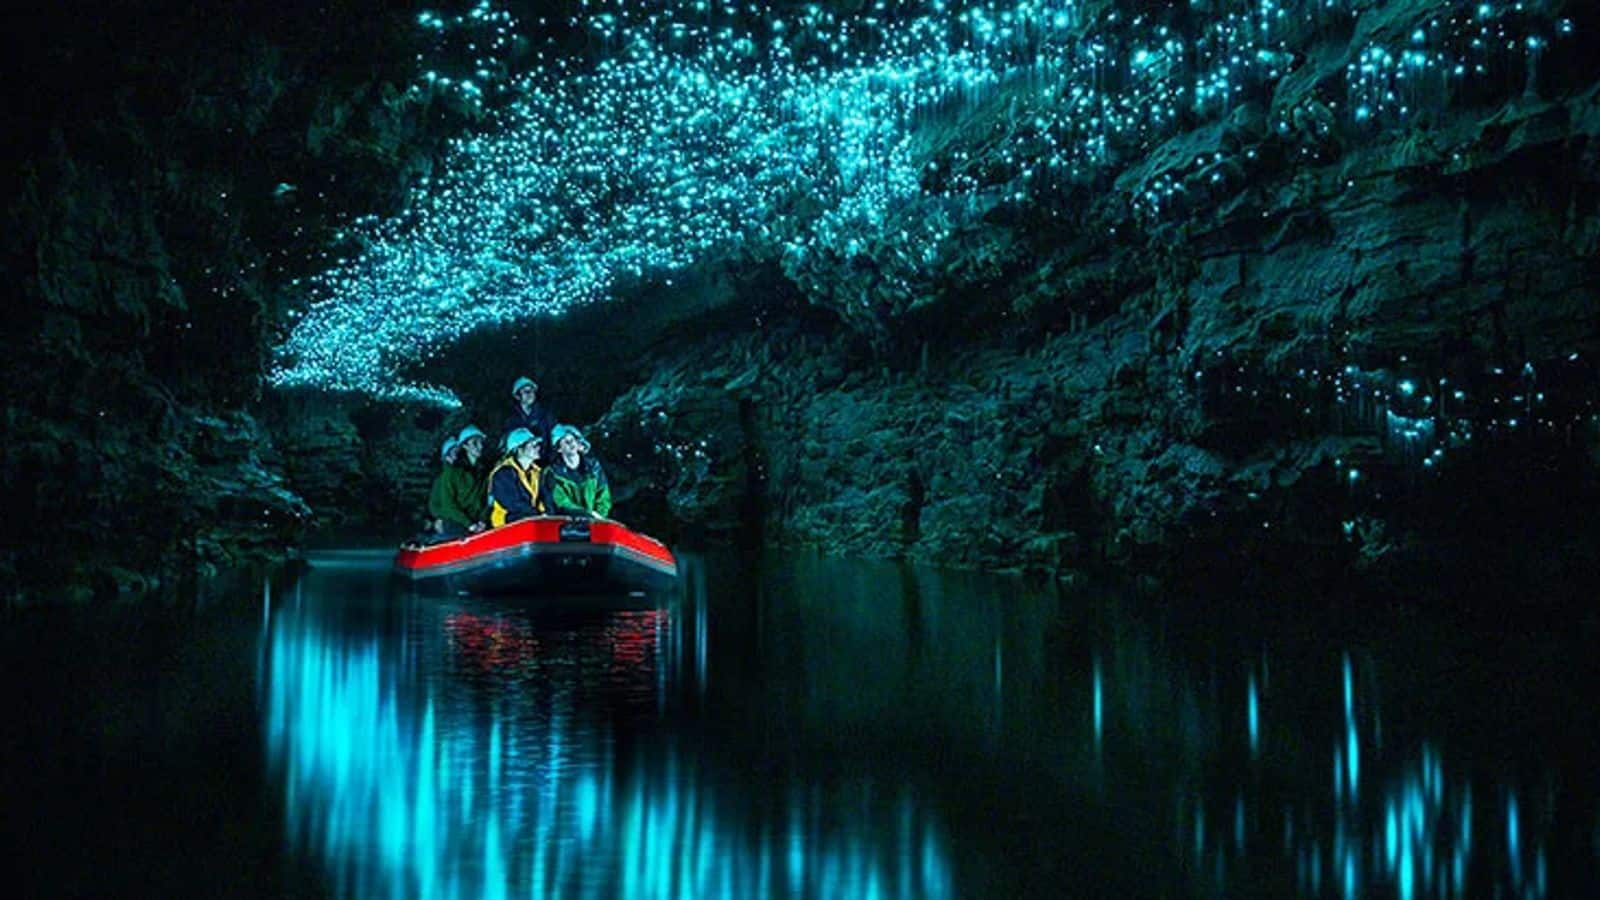 Embark on a caving quest in Waitomo, New Zealand